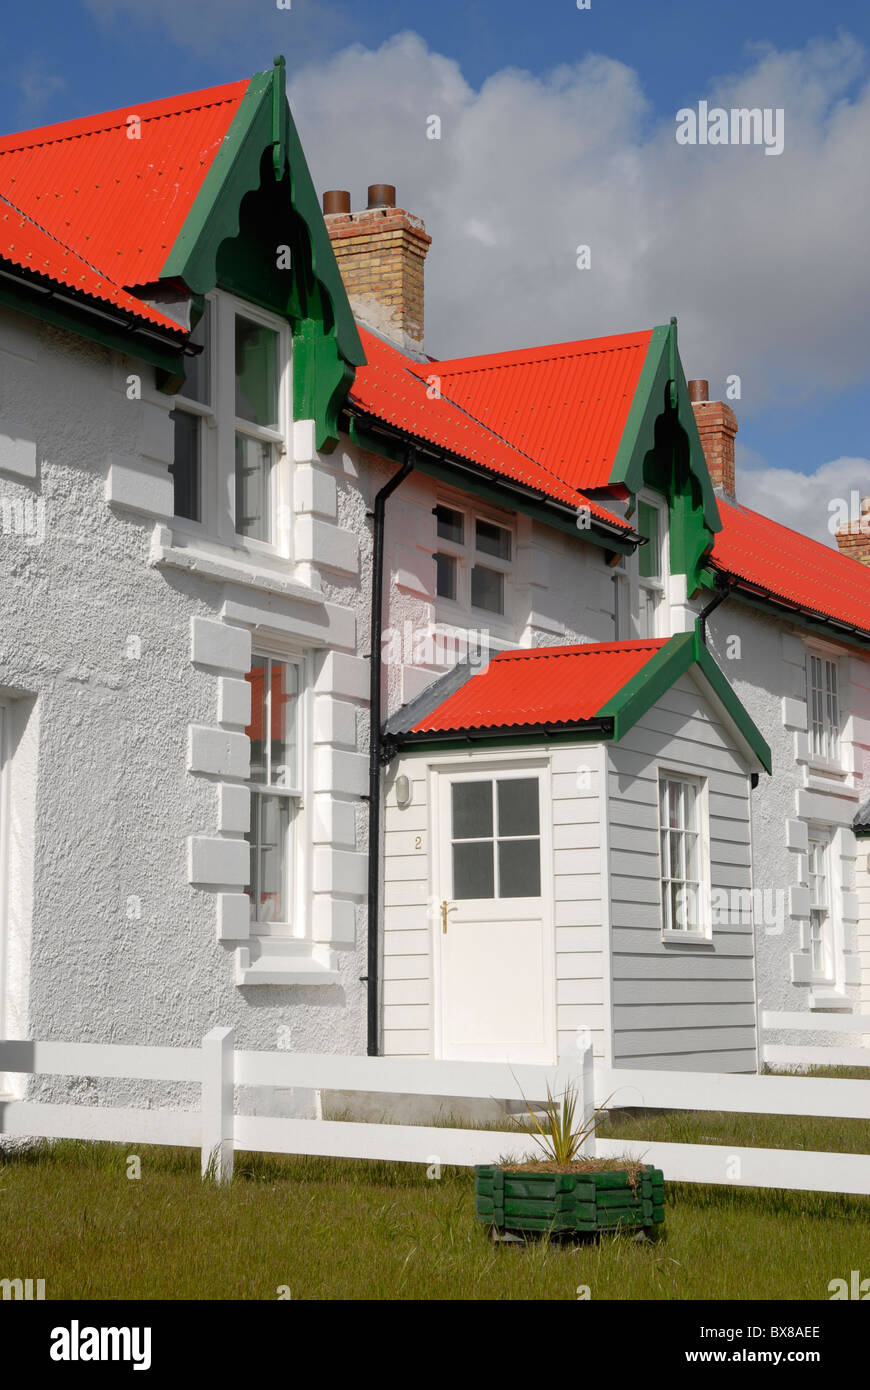 Houses in Port Stanley, Falkland islands Stock Photo